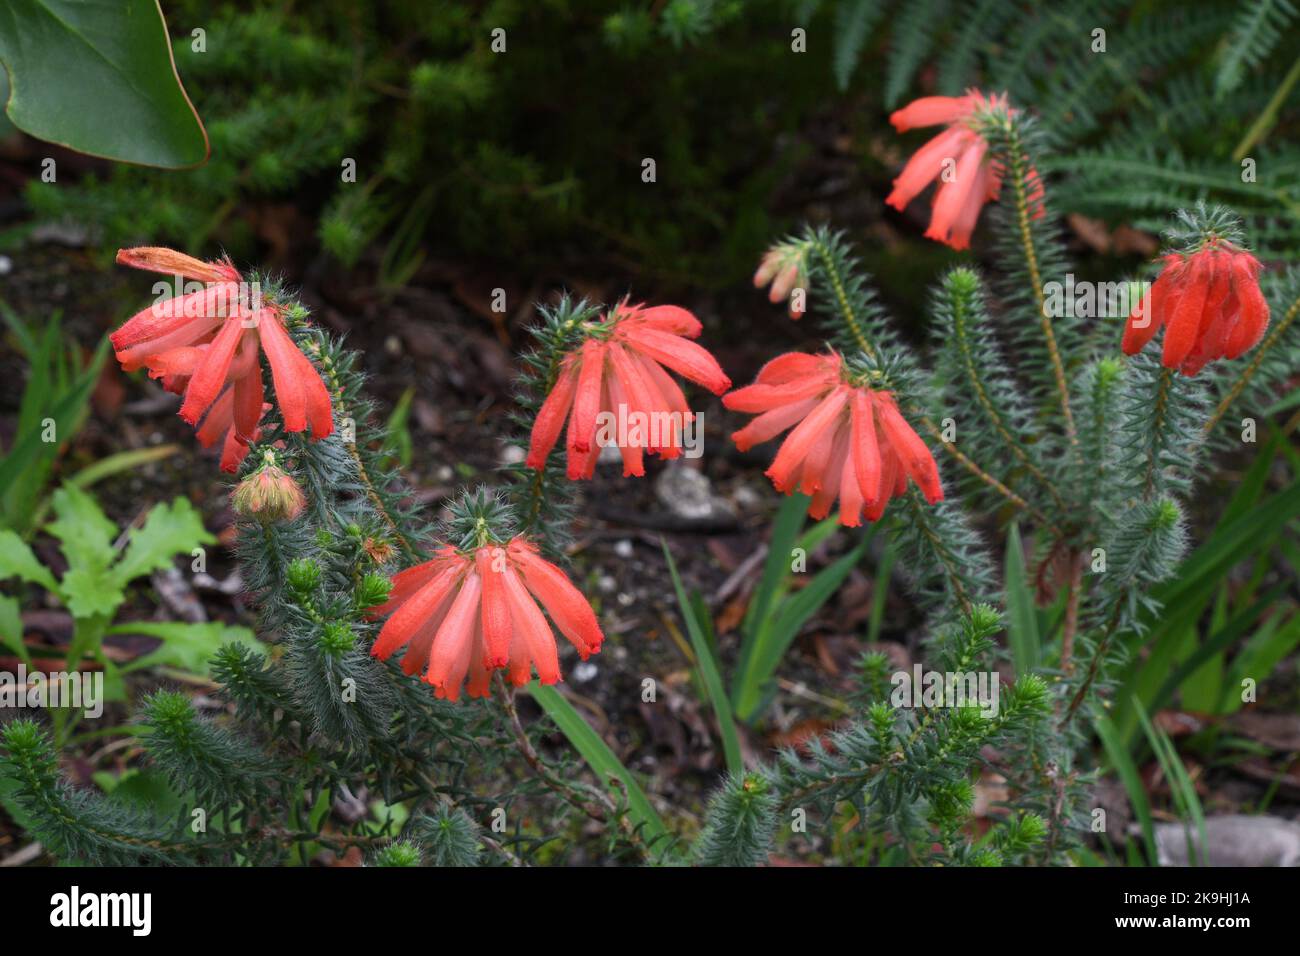 Heath, Erica cerinthoides, epicaceae,from South Africa.Growing in the sub-tropical Abbey Gardens on the Island of Tresco in the Isles of Scilly archip Stock Photo